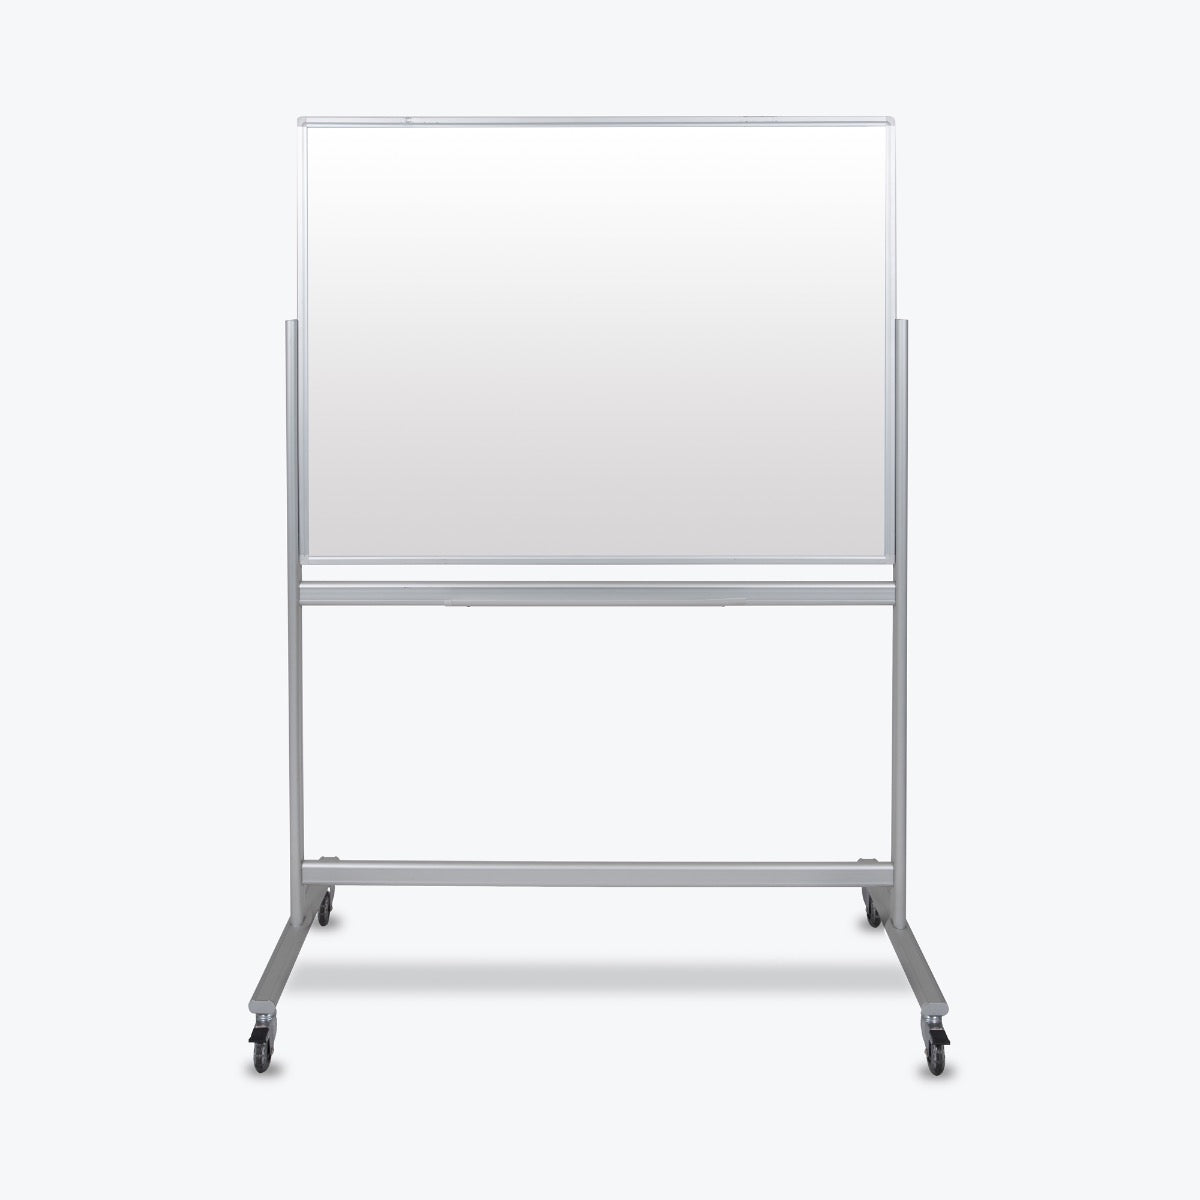 Luxor 72 in. x 40 in. Double Sided Mobile Magnetic Whiteboard